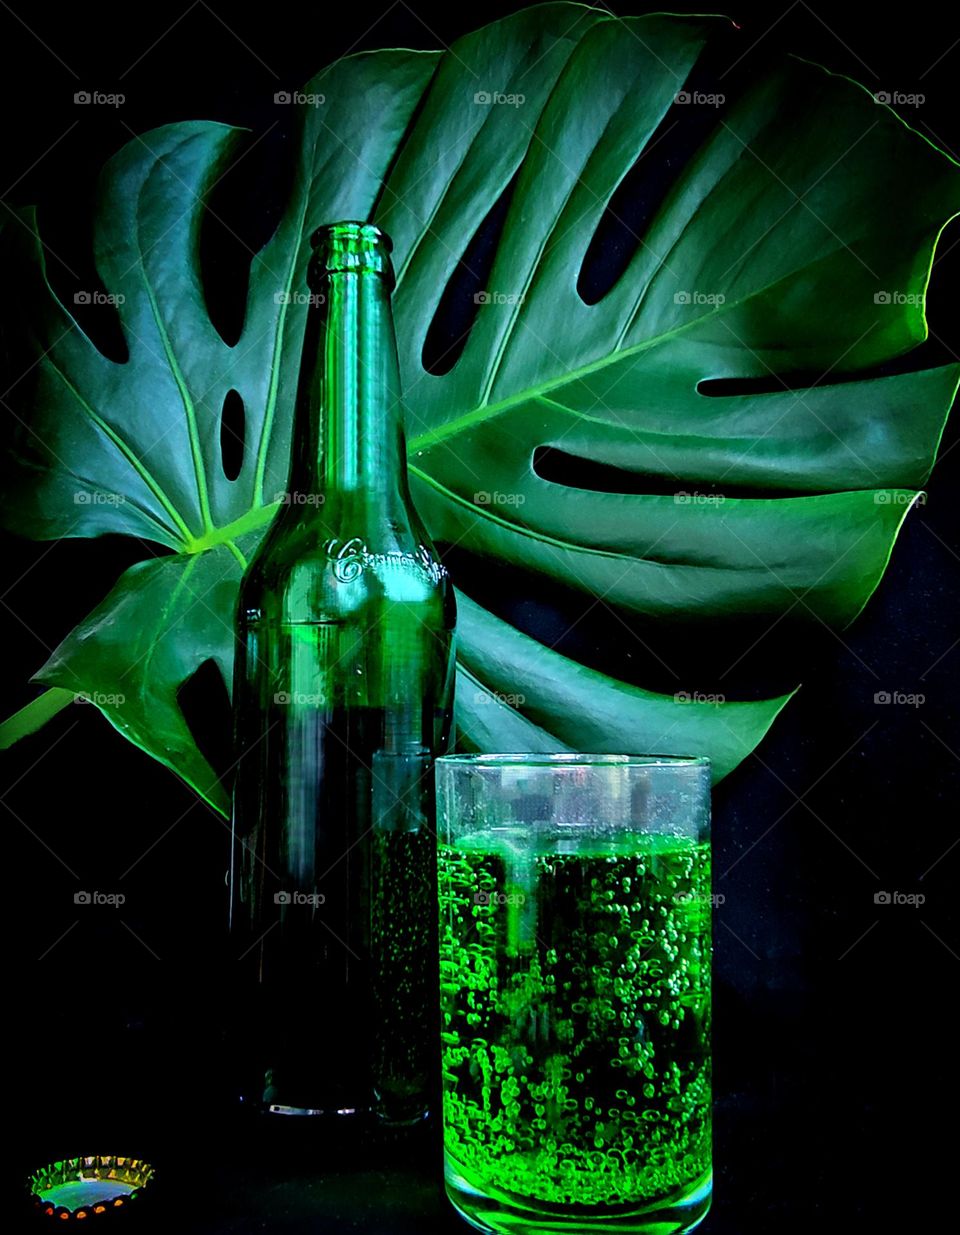 Green color.  On a black background, a green leaf of Monstera, a green glass bottle and a glass with a green drink. There is a metal cork next to the bottle.